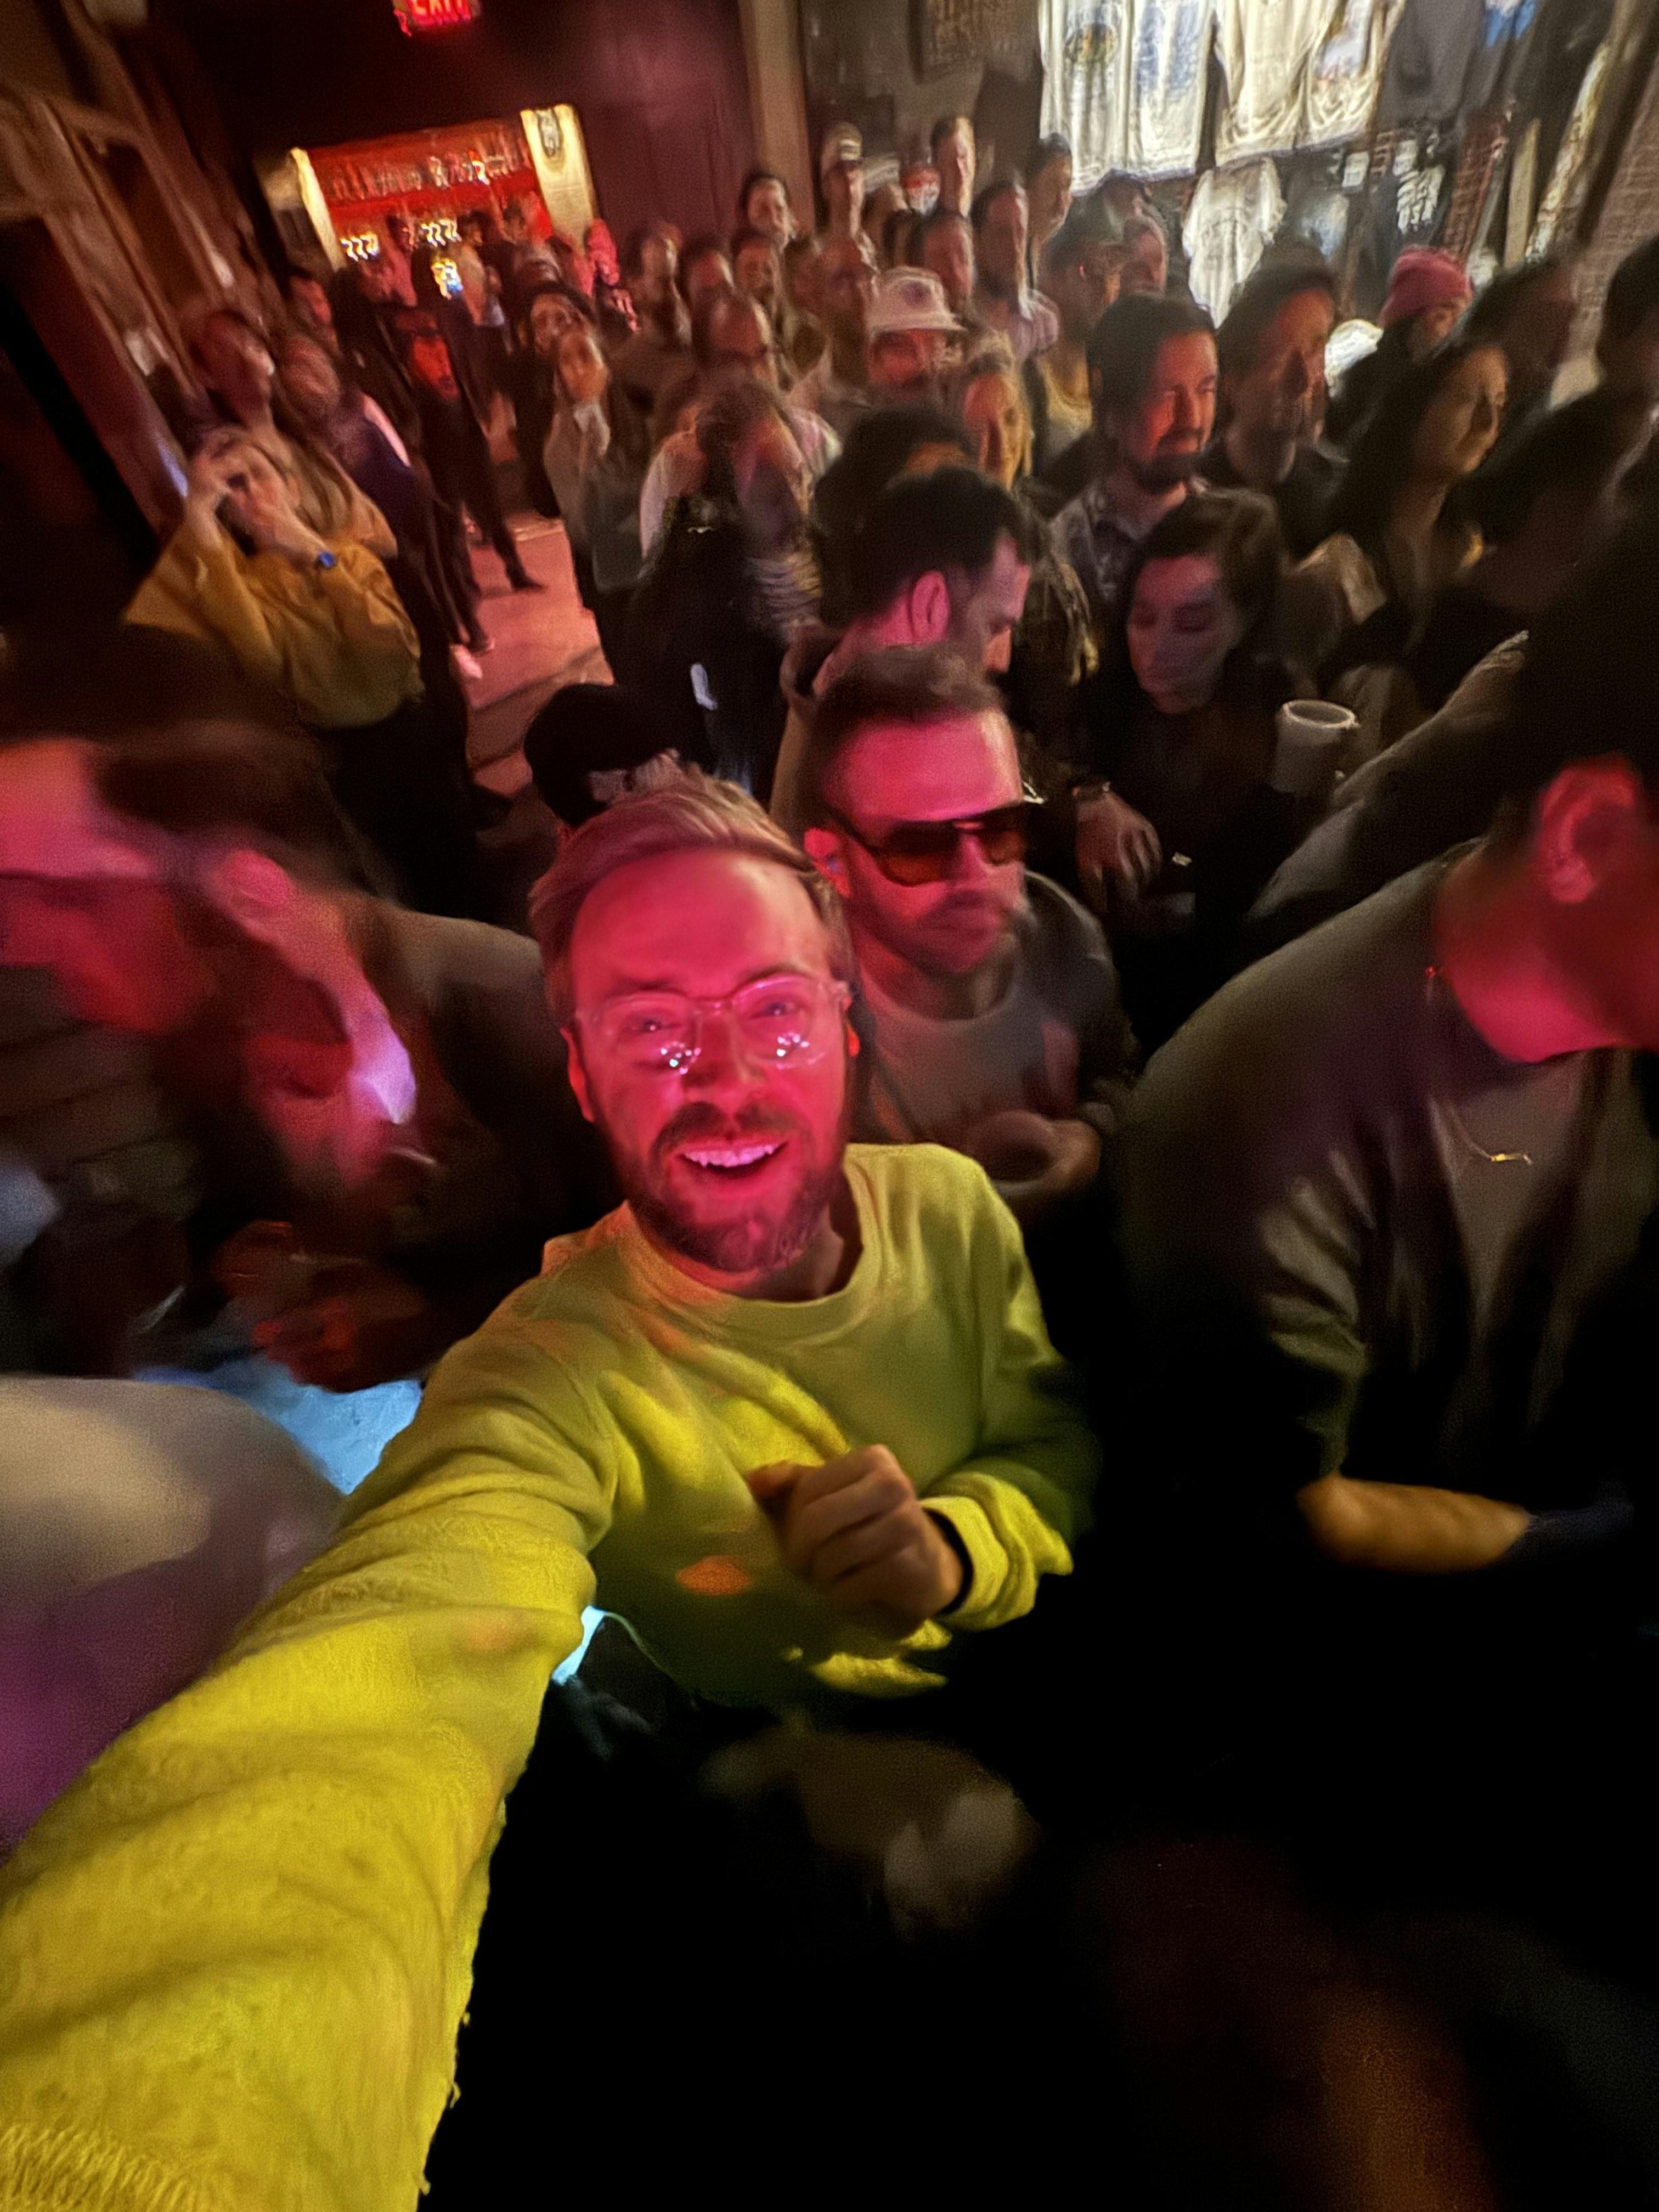 A selfie photo of Nick Gray in the middle of the crowd